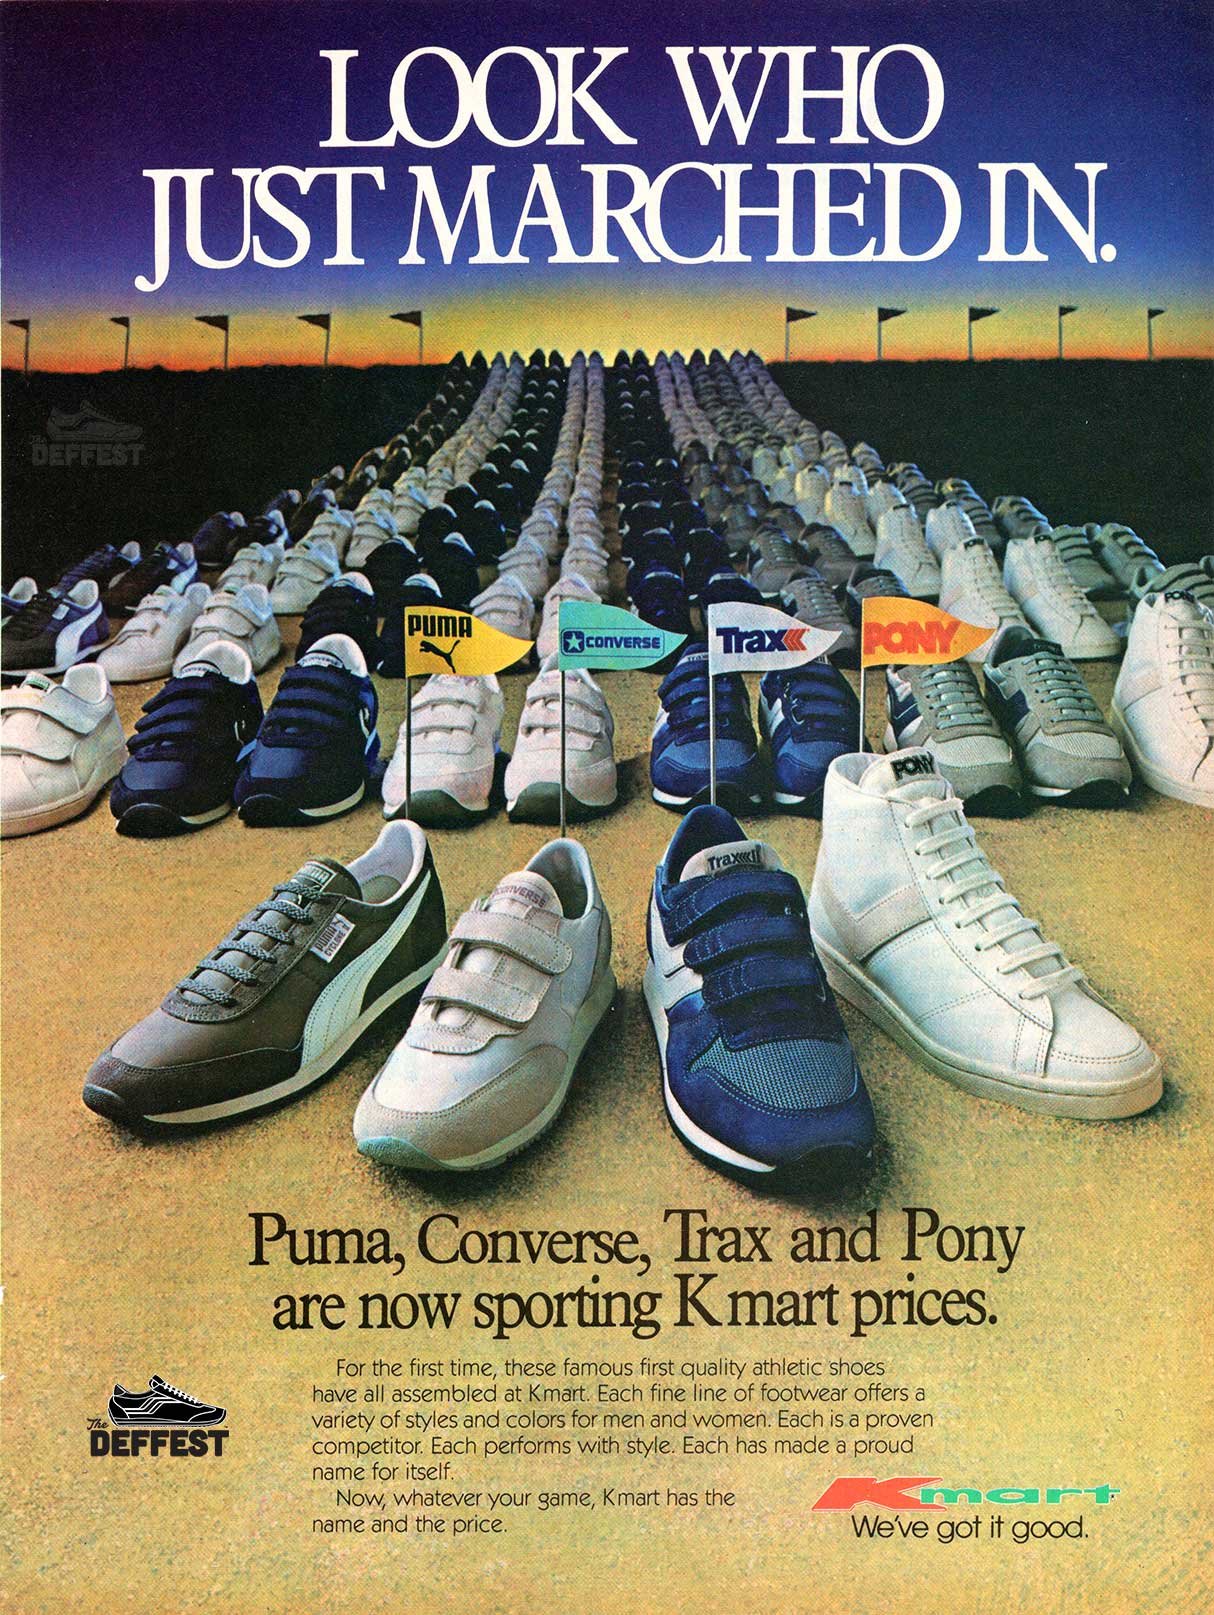 80s sneakers — The Deffest®. A vintage and retro sneaker blog